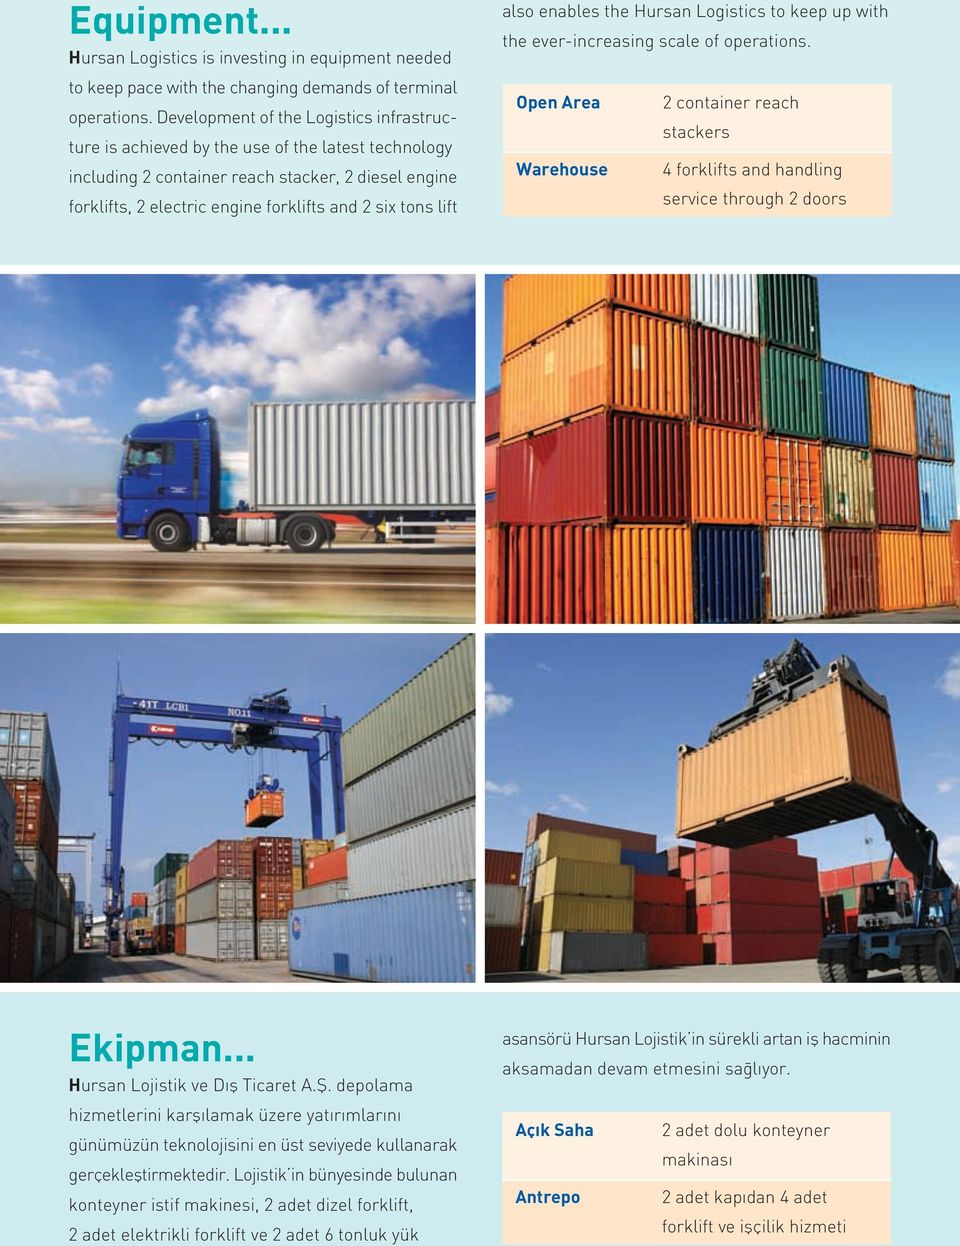 lift also enables the Hursan Logistics to keep up with the ever-increasing scale of operations. Open Area 2 container reach stackers Warehouse 4 forklifts and handling service through 2 doors Ekipman.